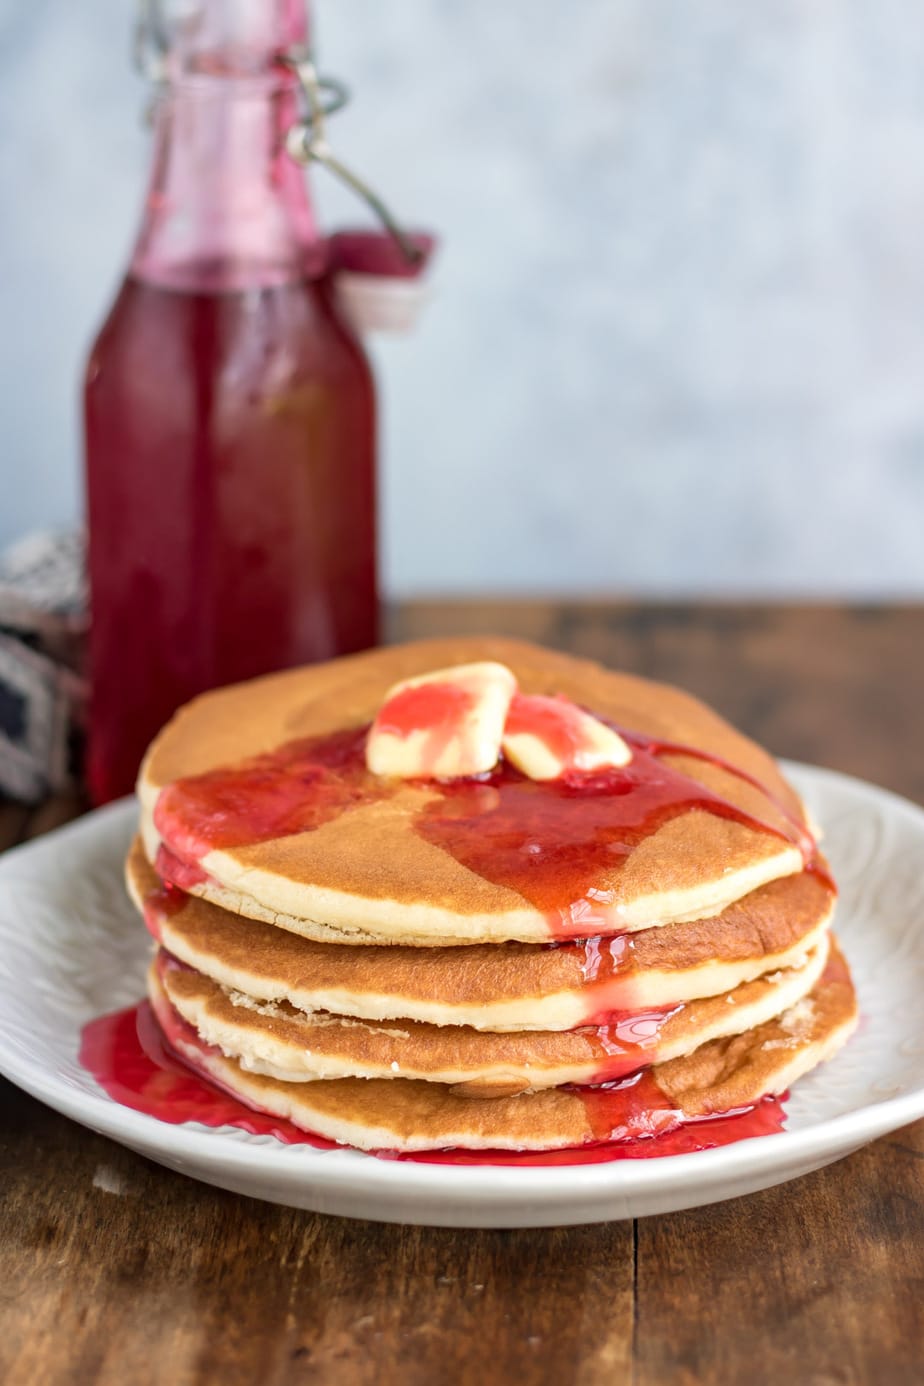 Pancakes with raspberry syrup.